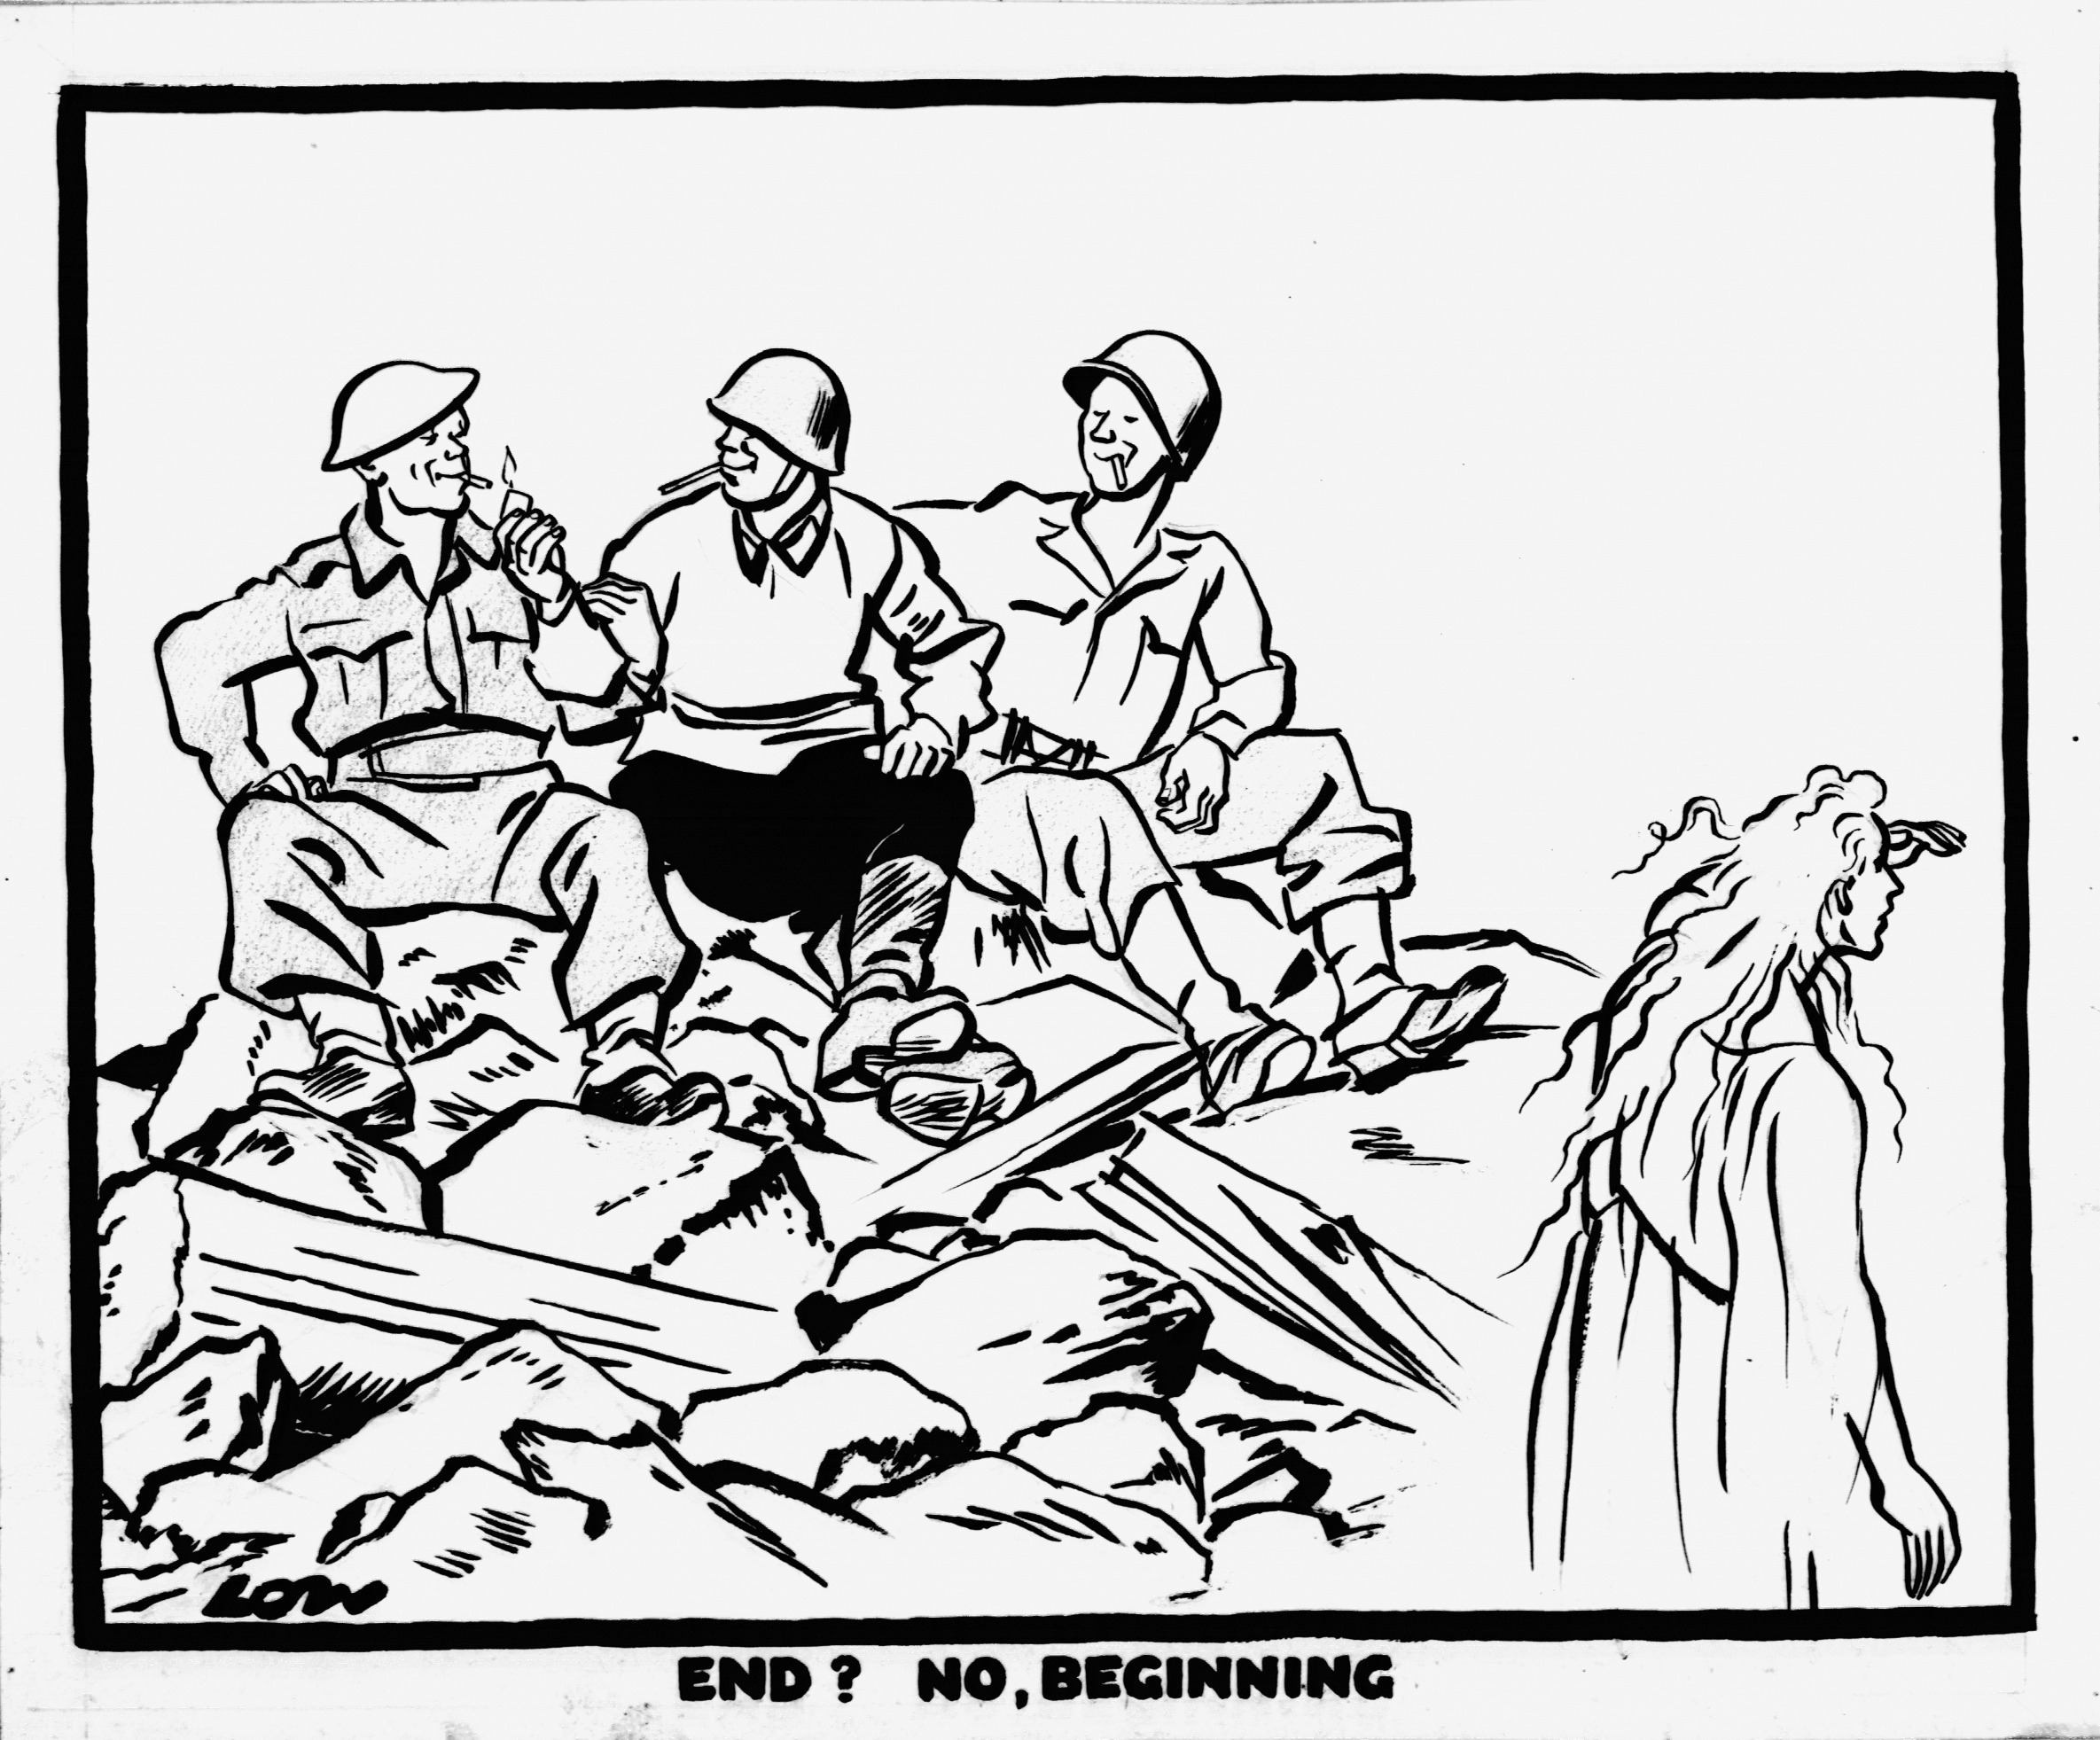 David Low, 'End? No - beginning', Evening Standard, 11th May 1945 (DL2417)